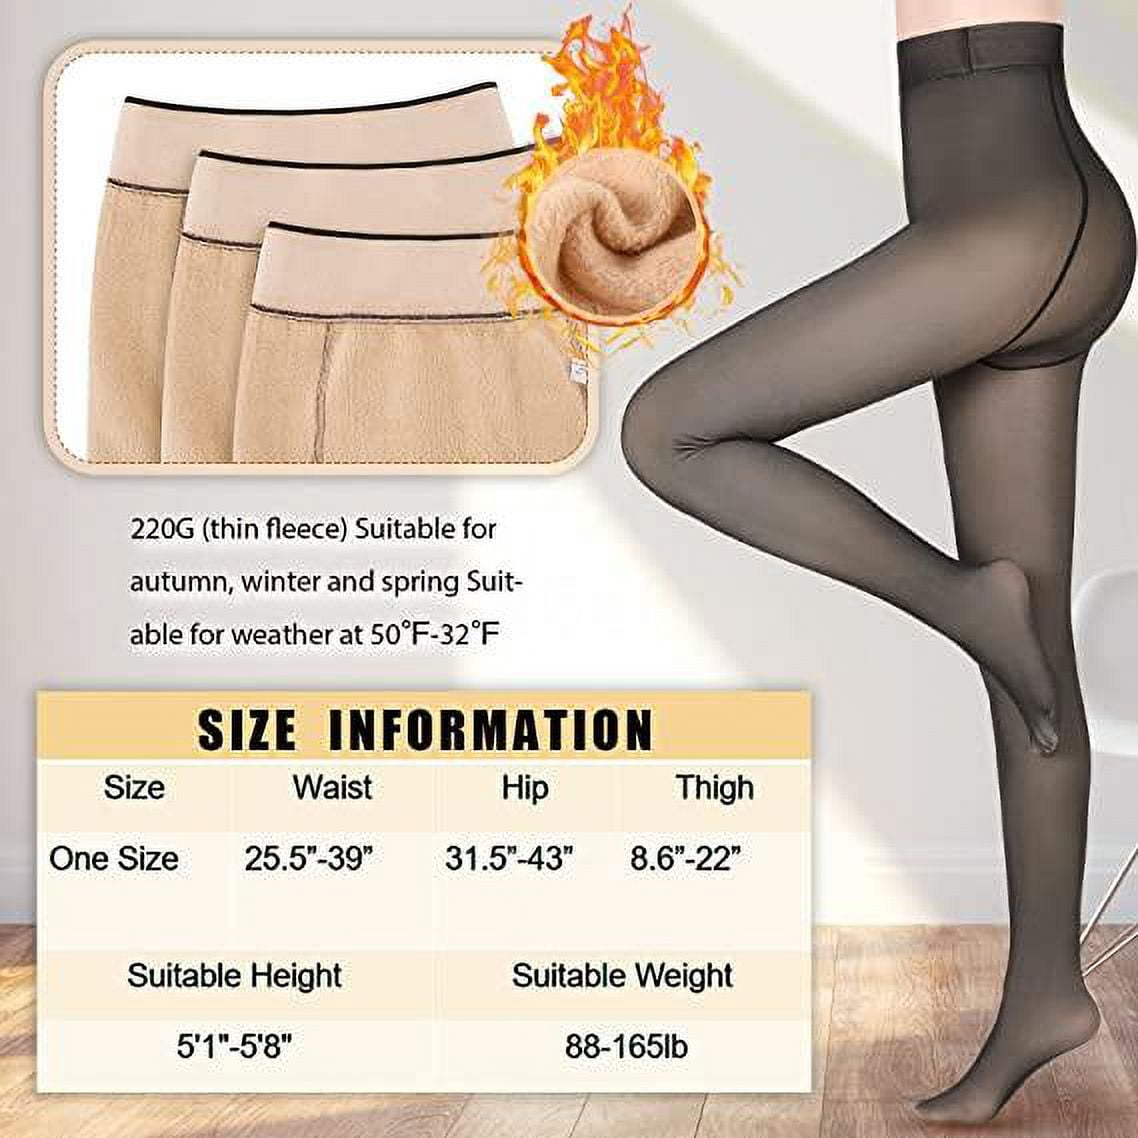 shuwee Fleece Lined Tights Women Leggings Thermal Pantyhose Fake Translucent  Tights Opaque High Waisted Winter Warm Sheer Tight 